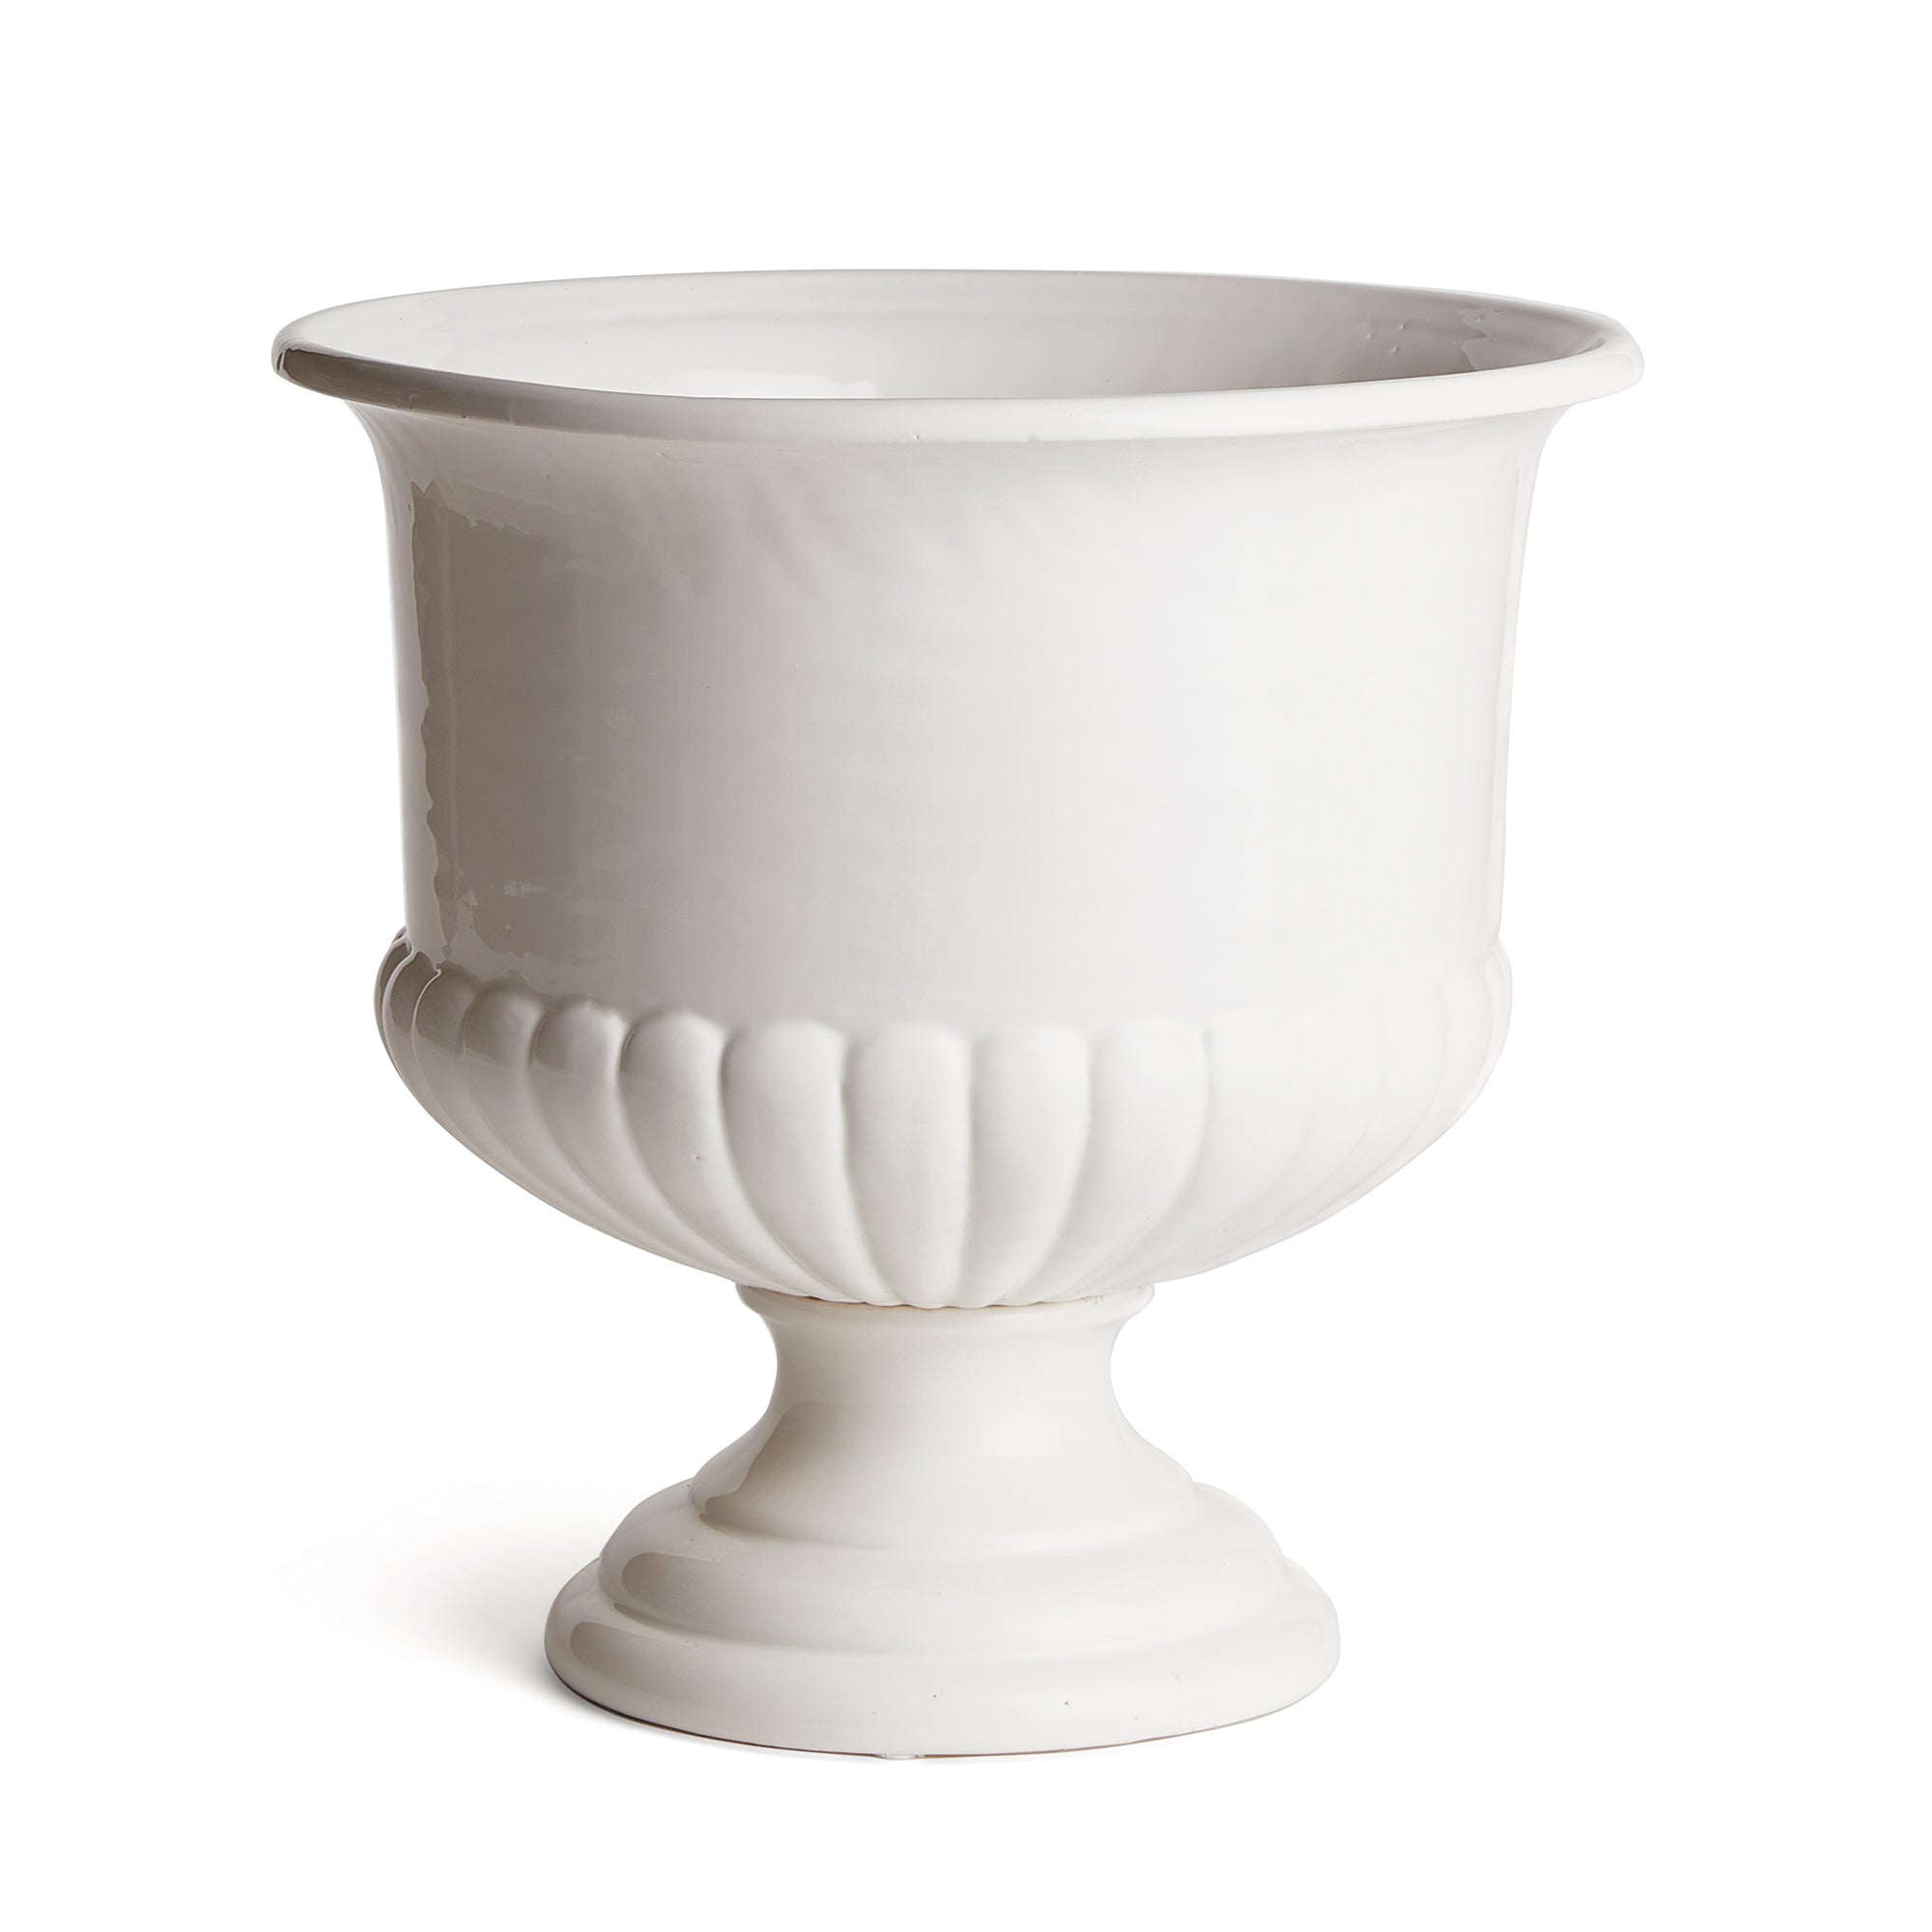 A real statement piece. The Mirabelle Pedestal Bowl is made in classic Italian style. A beautiful addition to any traditional to transitional space. Amethyst Home provides interior design, new construction, custom furniture, and area rugs in the San Diego metro area.